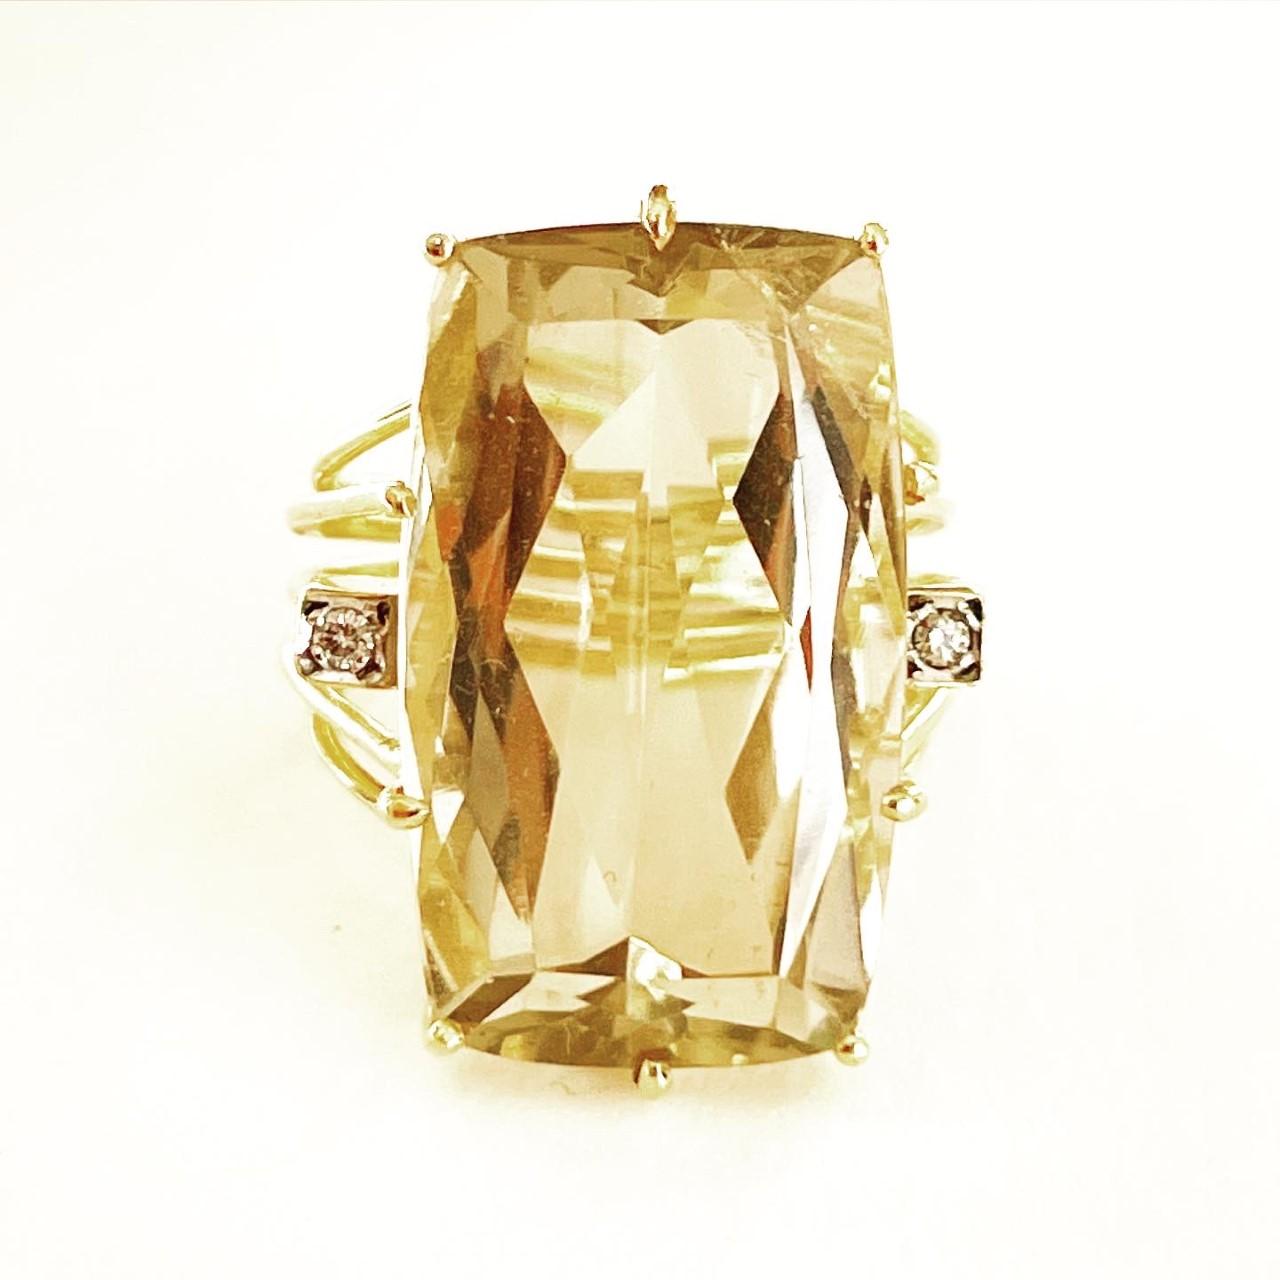 Beautifully designed and handcrafted in 18 karat yellow gold, this Retro cocktail ring from circa 1950 features a lovely Citrine measured to weigh approximately 23.5 carats and diamonds.
Superb tank ring, linear and geometrical design typical for